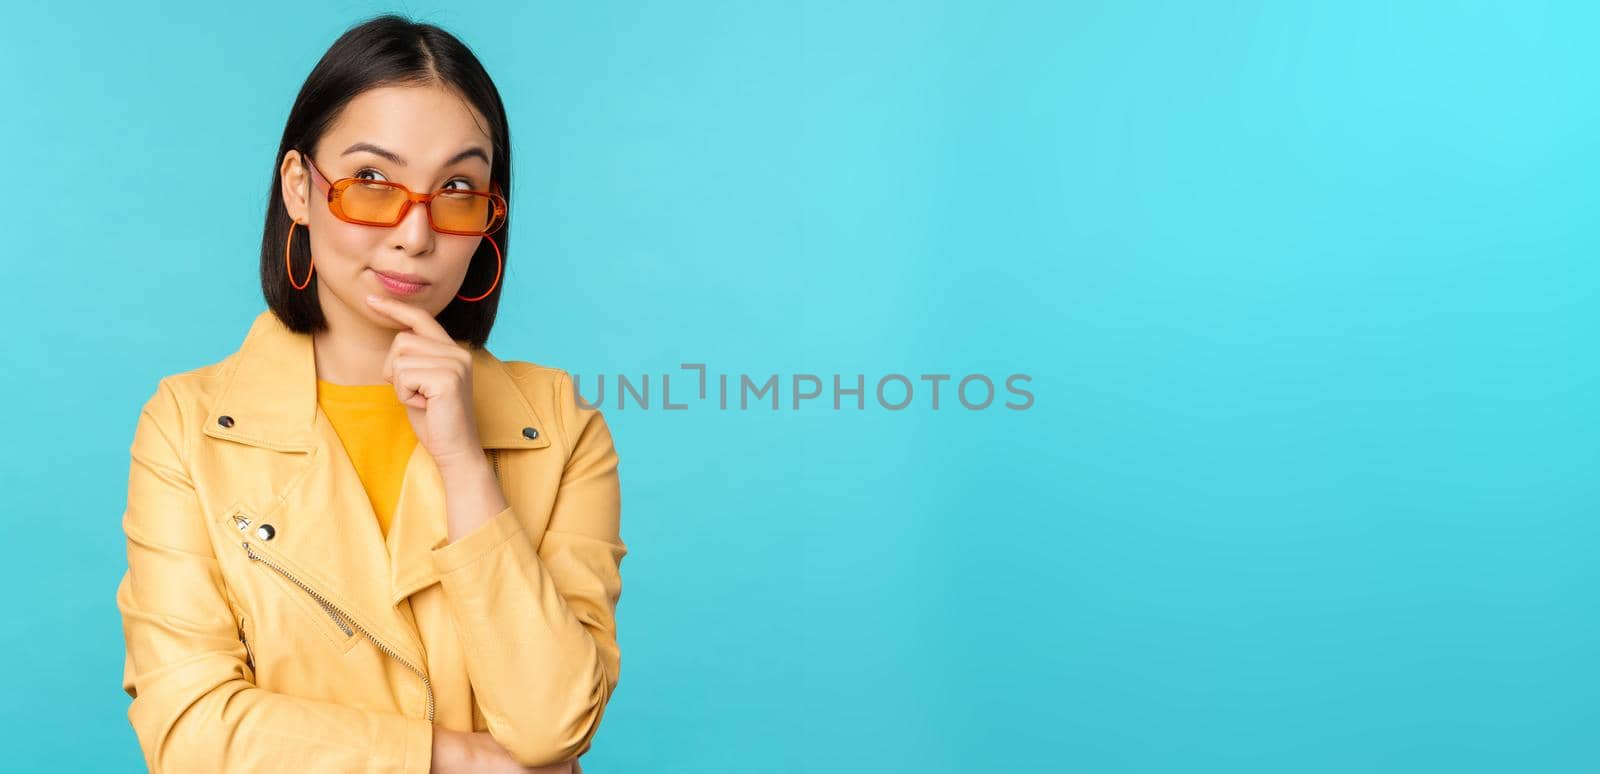 Portrait of asian woman thinking, looking thoughtful, searching ideas or solution, wearing sunglasses, standing over blue background.